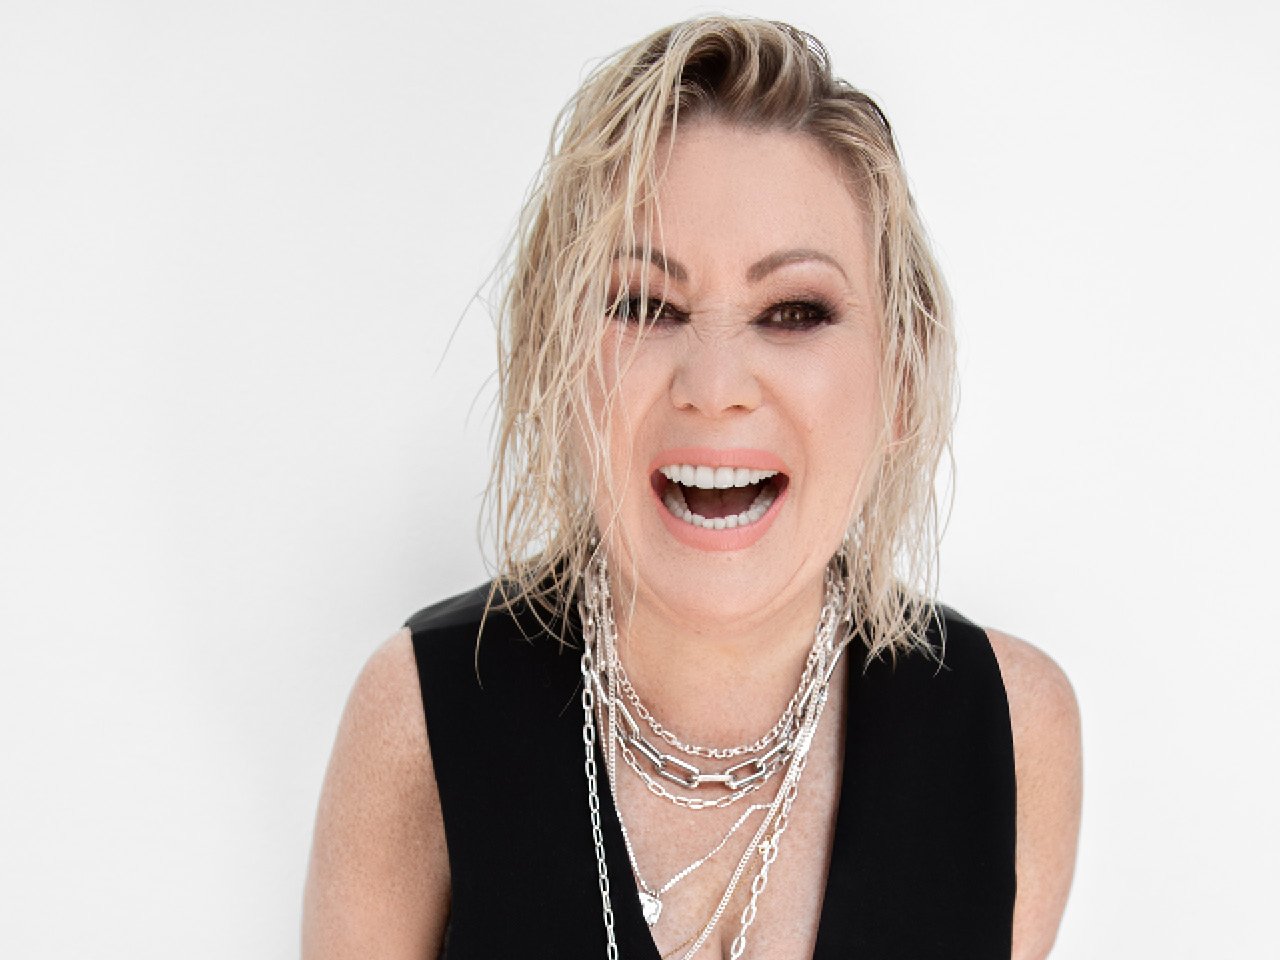 Jann Arden laughing in front of a white background wearing a black blazer and layered chain necklaces.